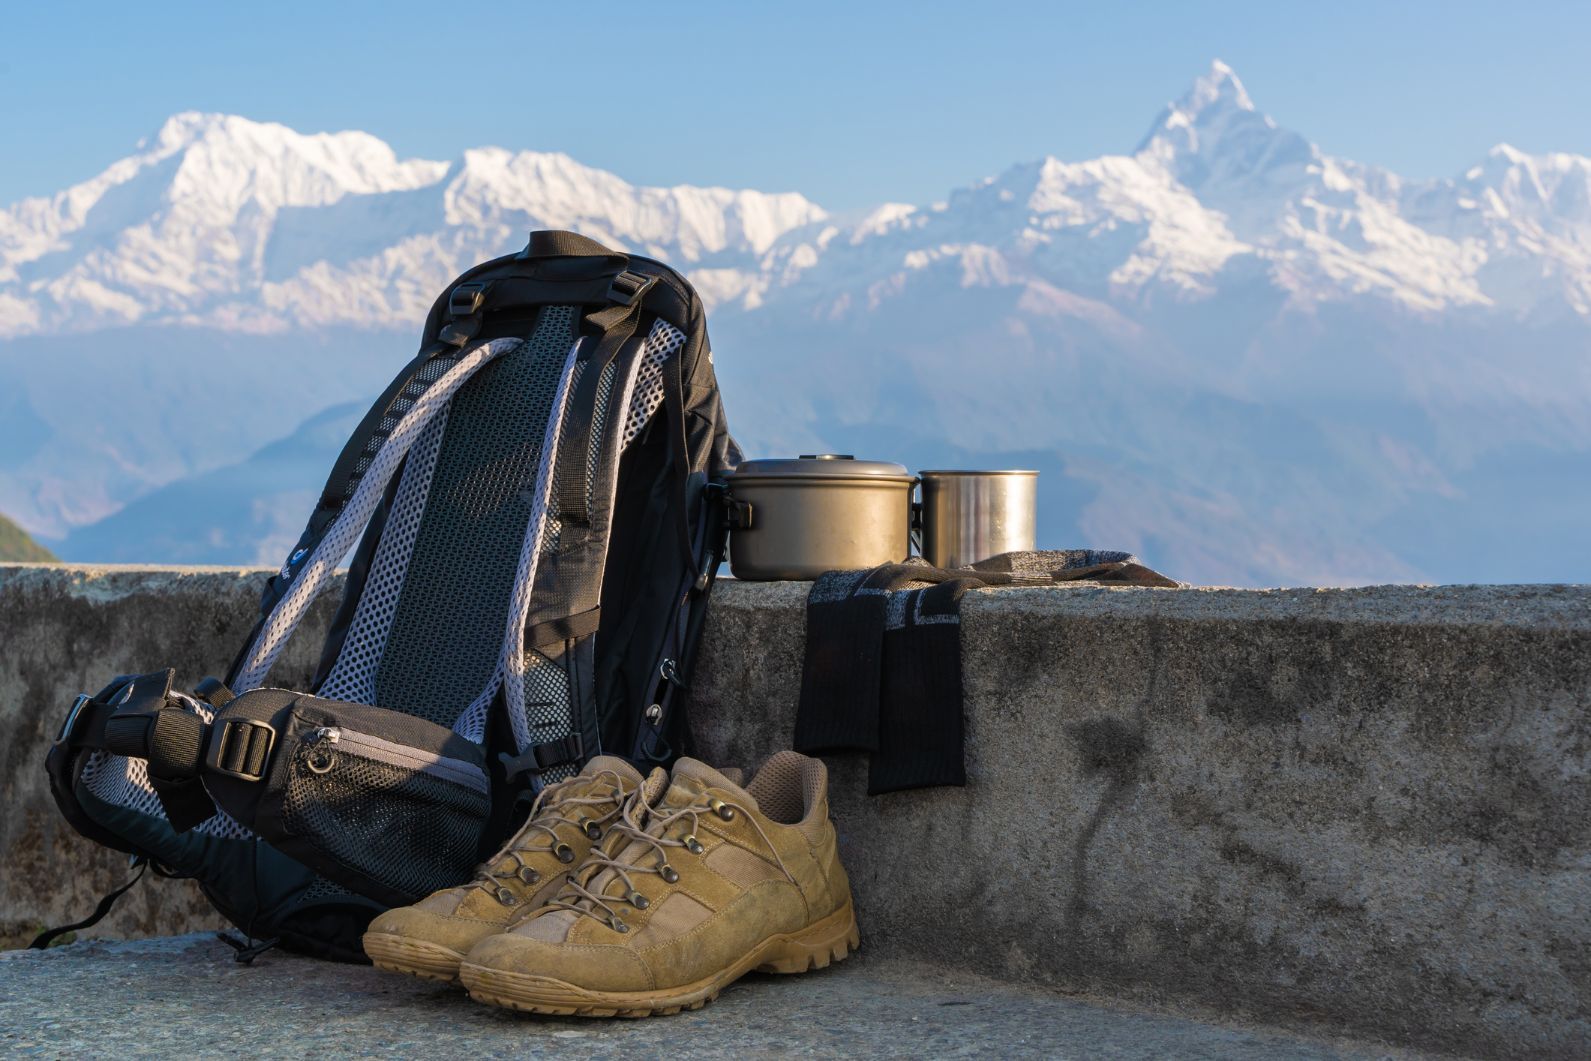 Hiking boots, a backpack and cooking equipment pictured in front of the Everest hiking region